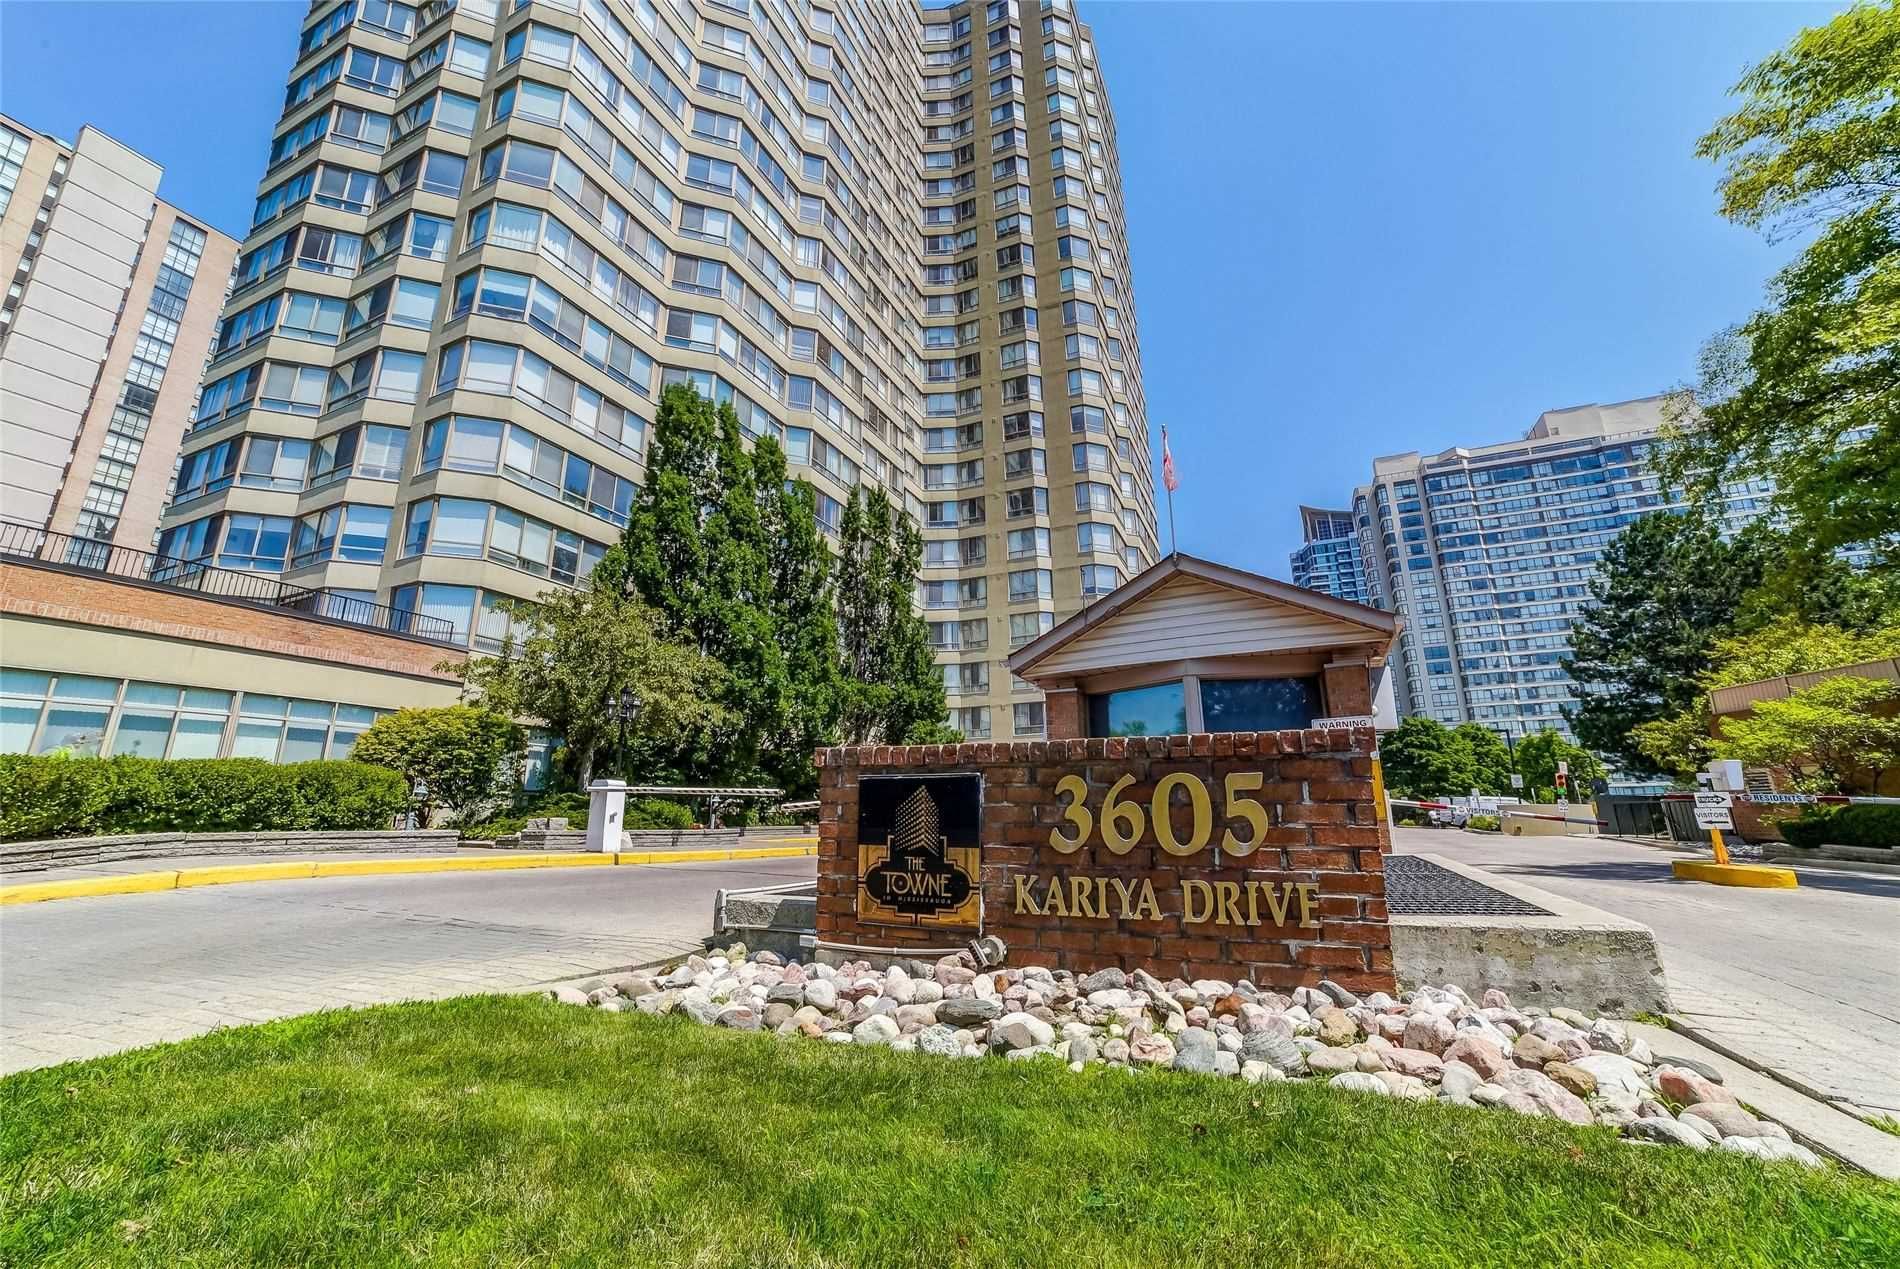 3567-3605 Kariya Dr. This condo at The Towne Condos is located in  Mississauga, Toronto - image #2 of 3 by Strata.ca